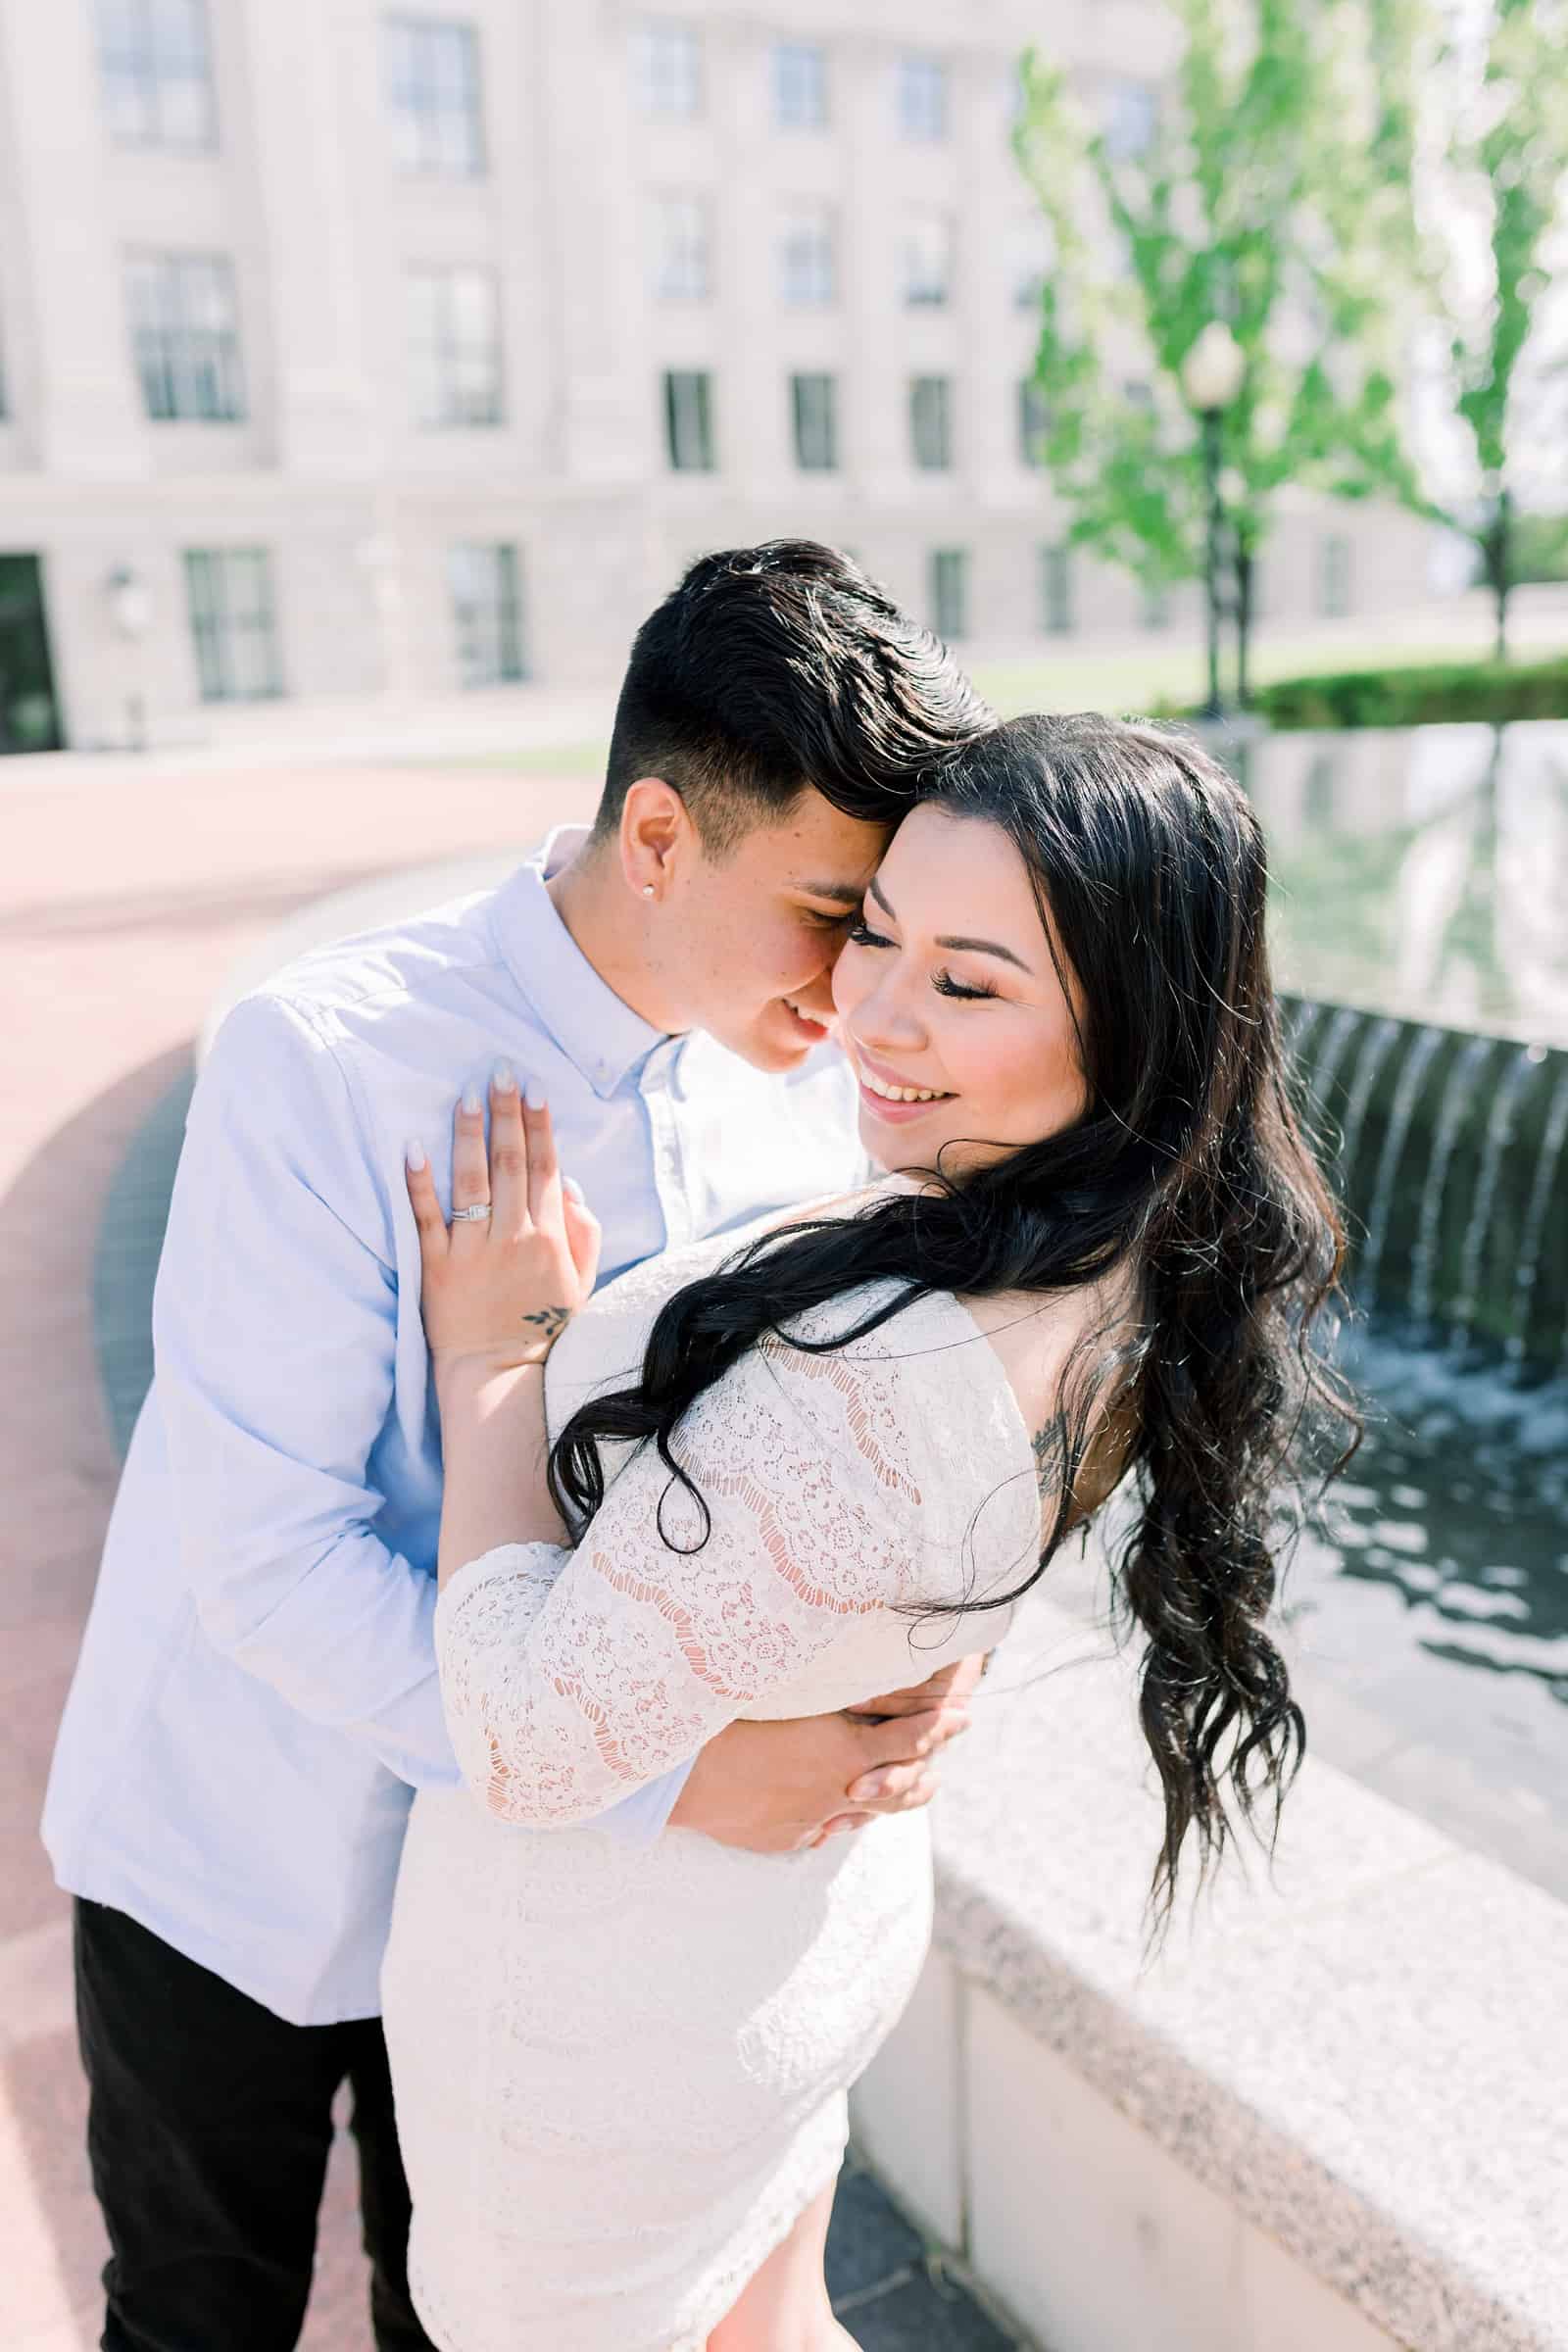 Classy engagement photos at the Utah State Capitol Building in downtown Salt Lake City, spring fountain pictures